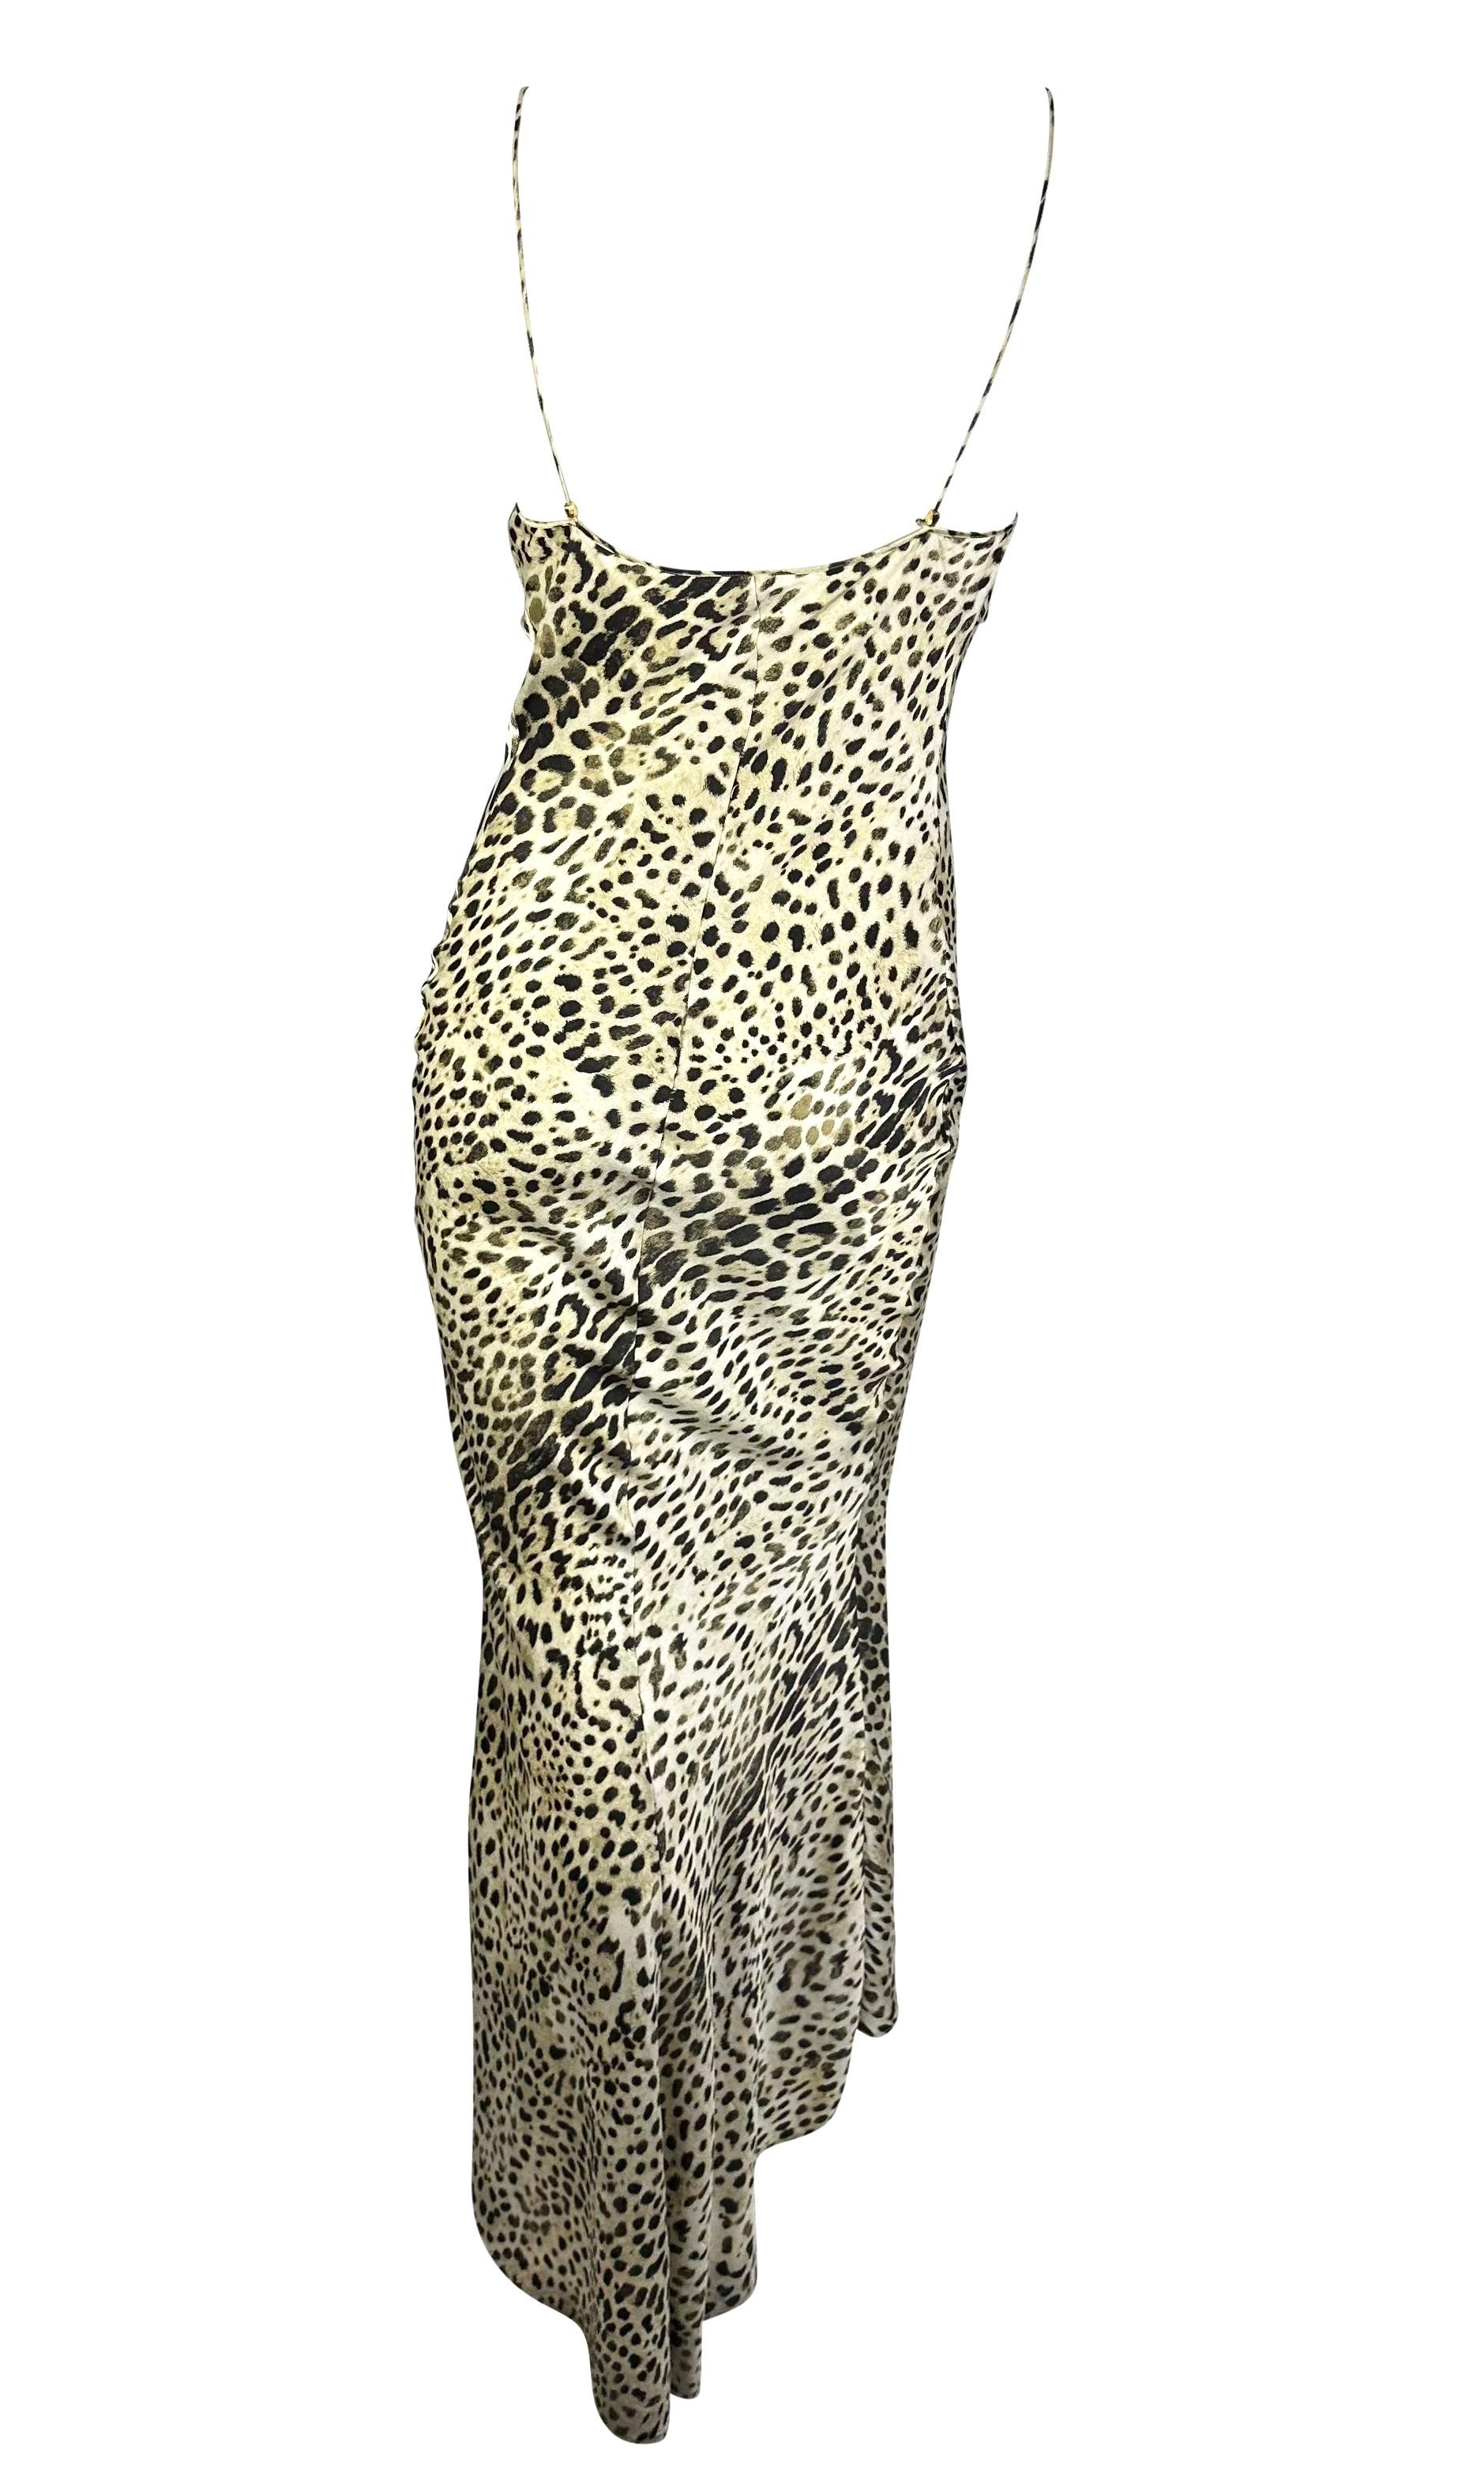 S/S 2001 Roberto Cavalli Animal Print Asymmetric Silk Bias Cut Gown In Good Condition For Sale In West Hollywood, CA